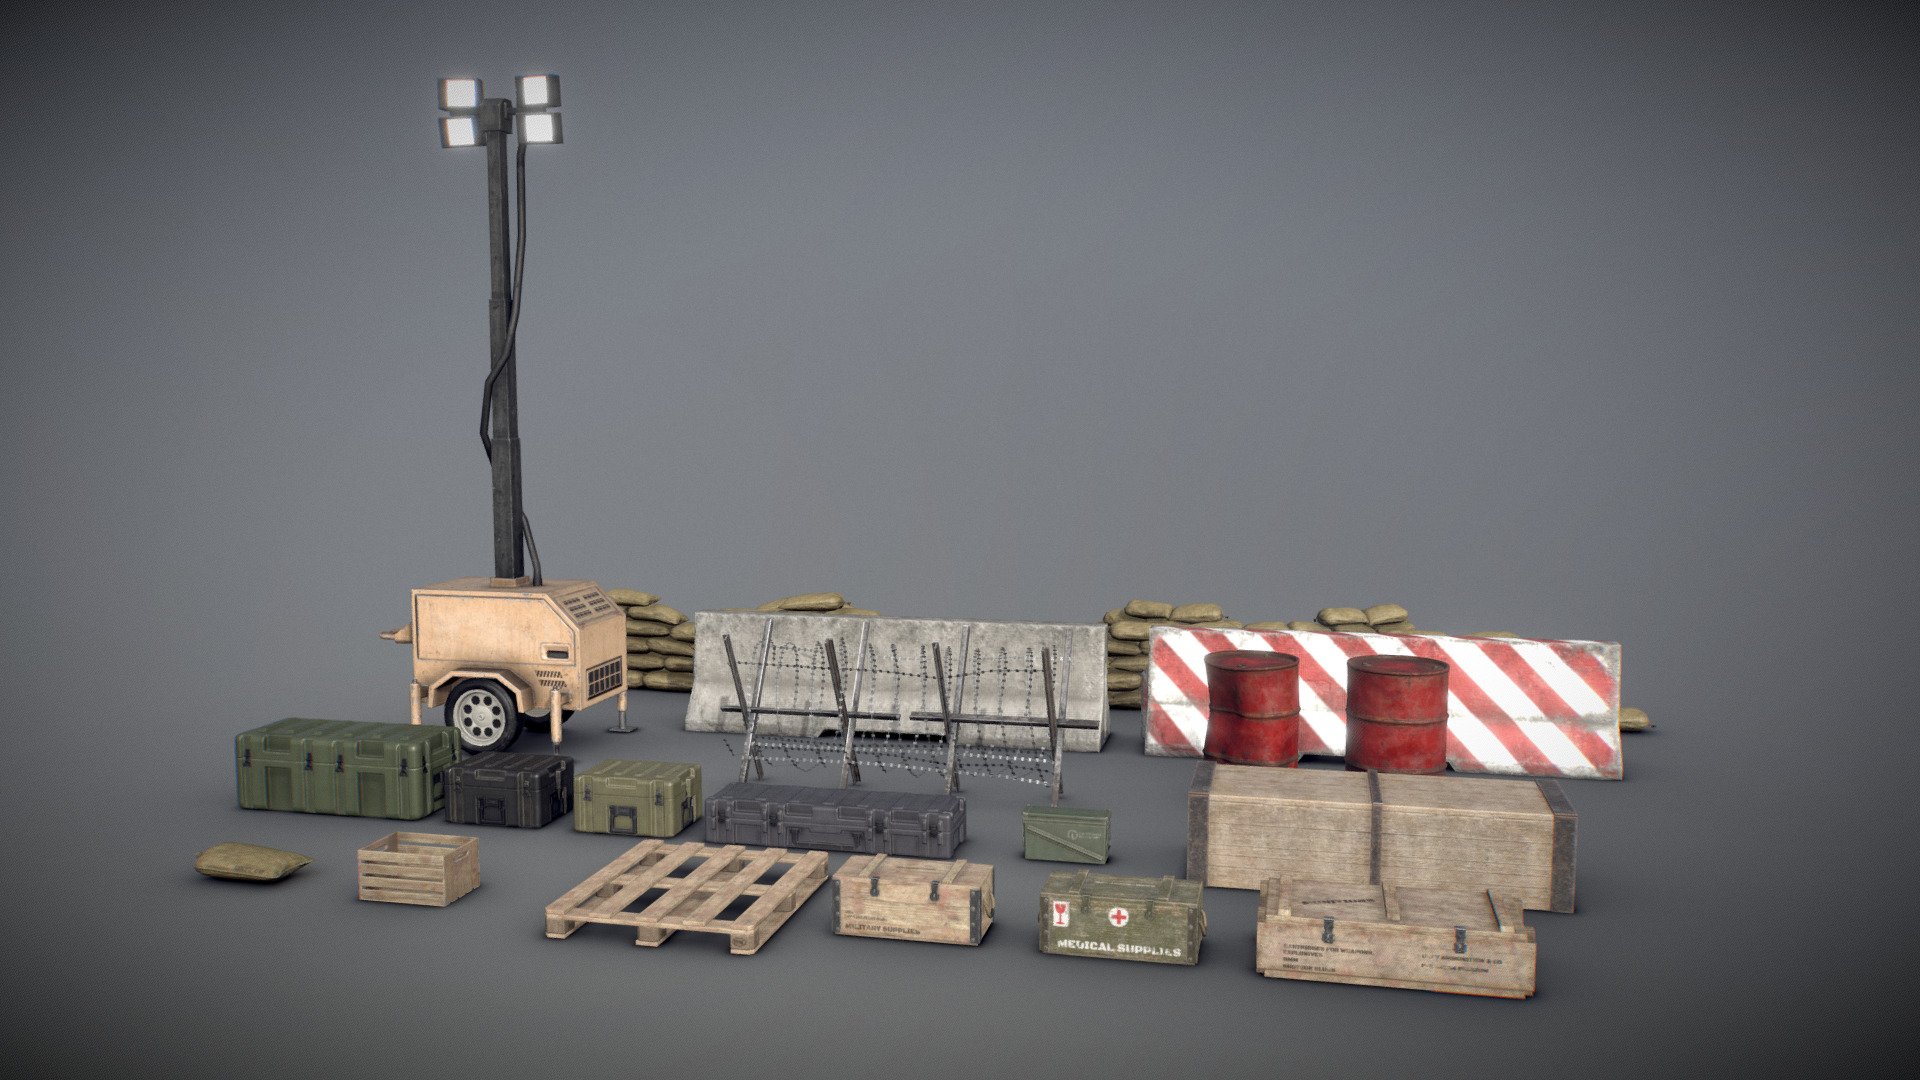 Military Game Asset Pack volume 1

There is an additional file with Unreal Engine textures
Unity Coming soon (will be added to this file, not a different product)

All textures are 1024 x 1024 or lower
All the assets are average 1000 Tris per model.

If you need any support, assistance or feedback, you can comment below and I will respond as quickly as possible 3d model